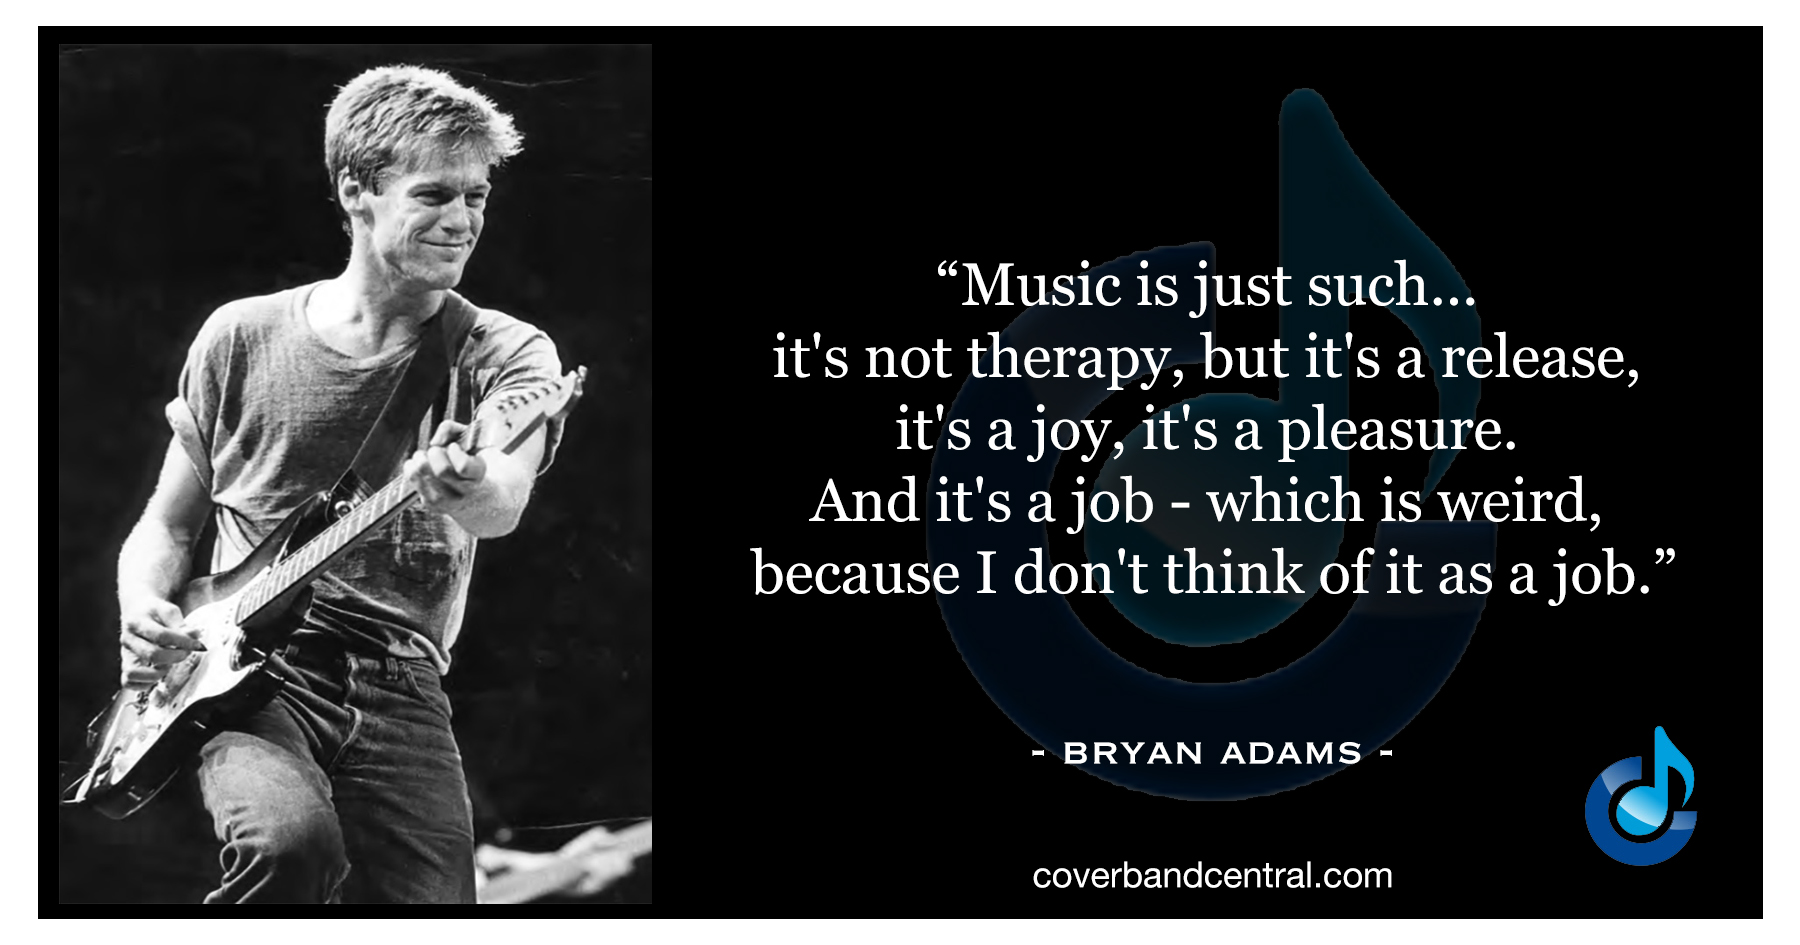 Bryan Adams quote